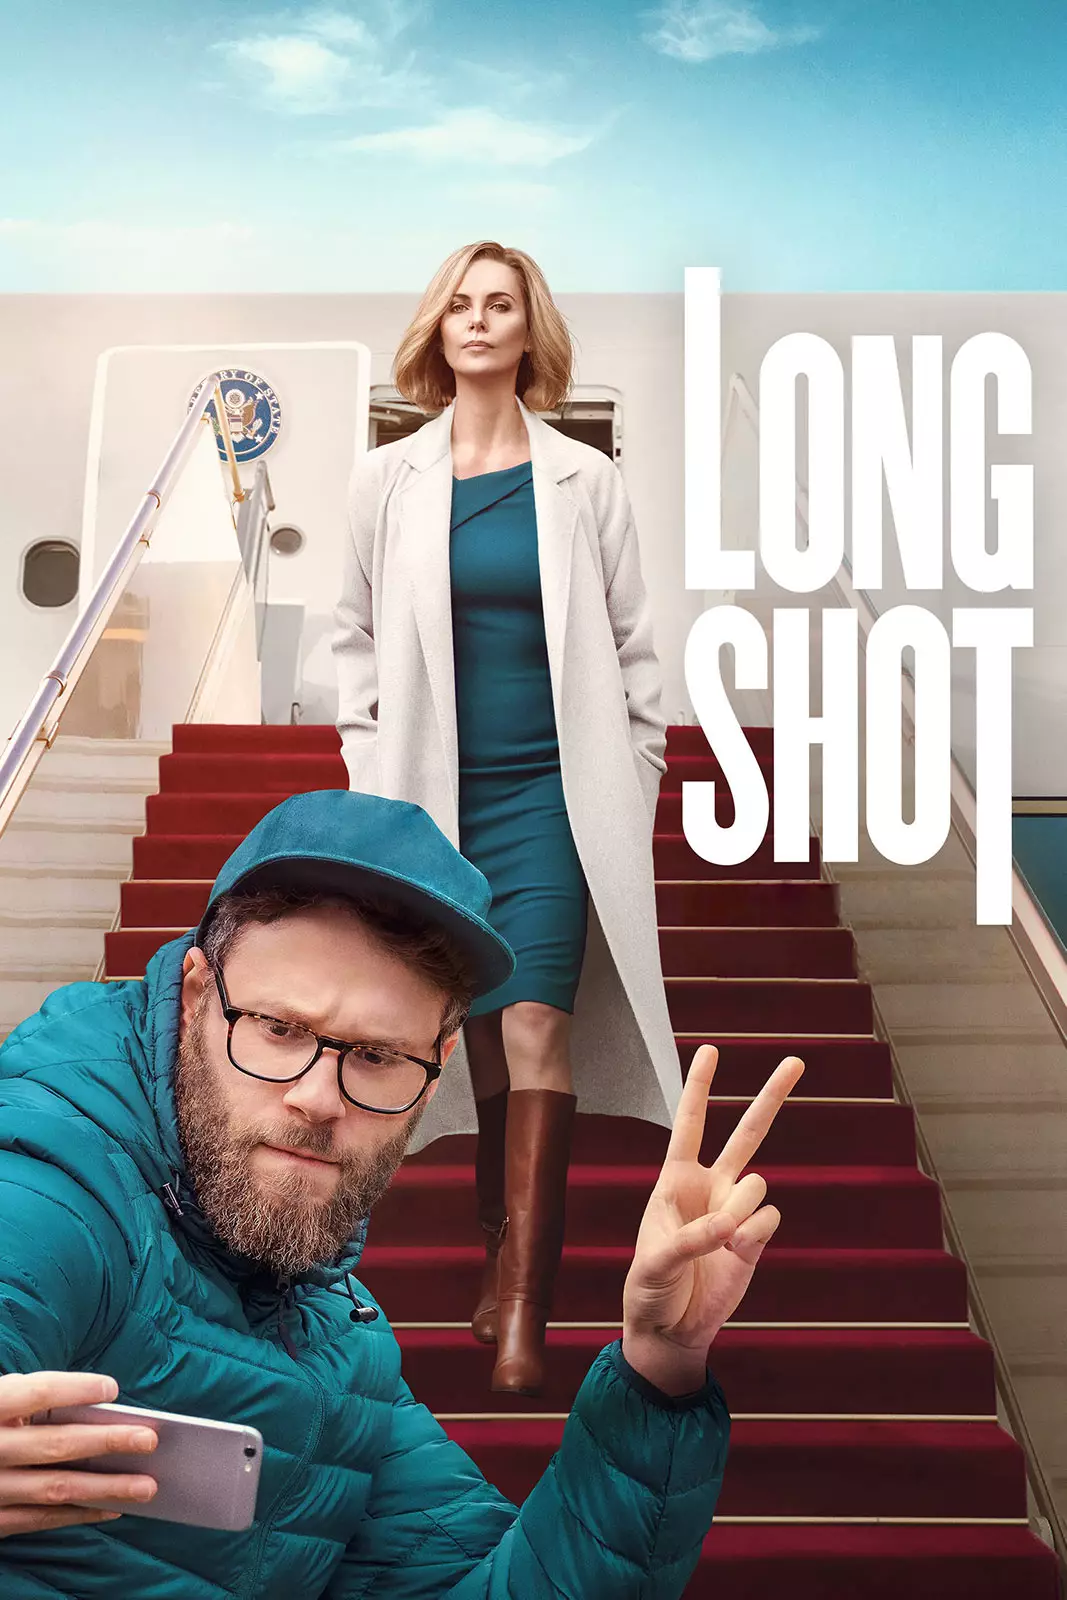 Theatrical Poster of the film "Long Shot" (2019) starring Seth Rogen and Charlize Theron.